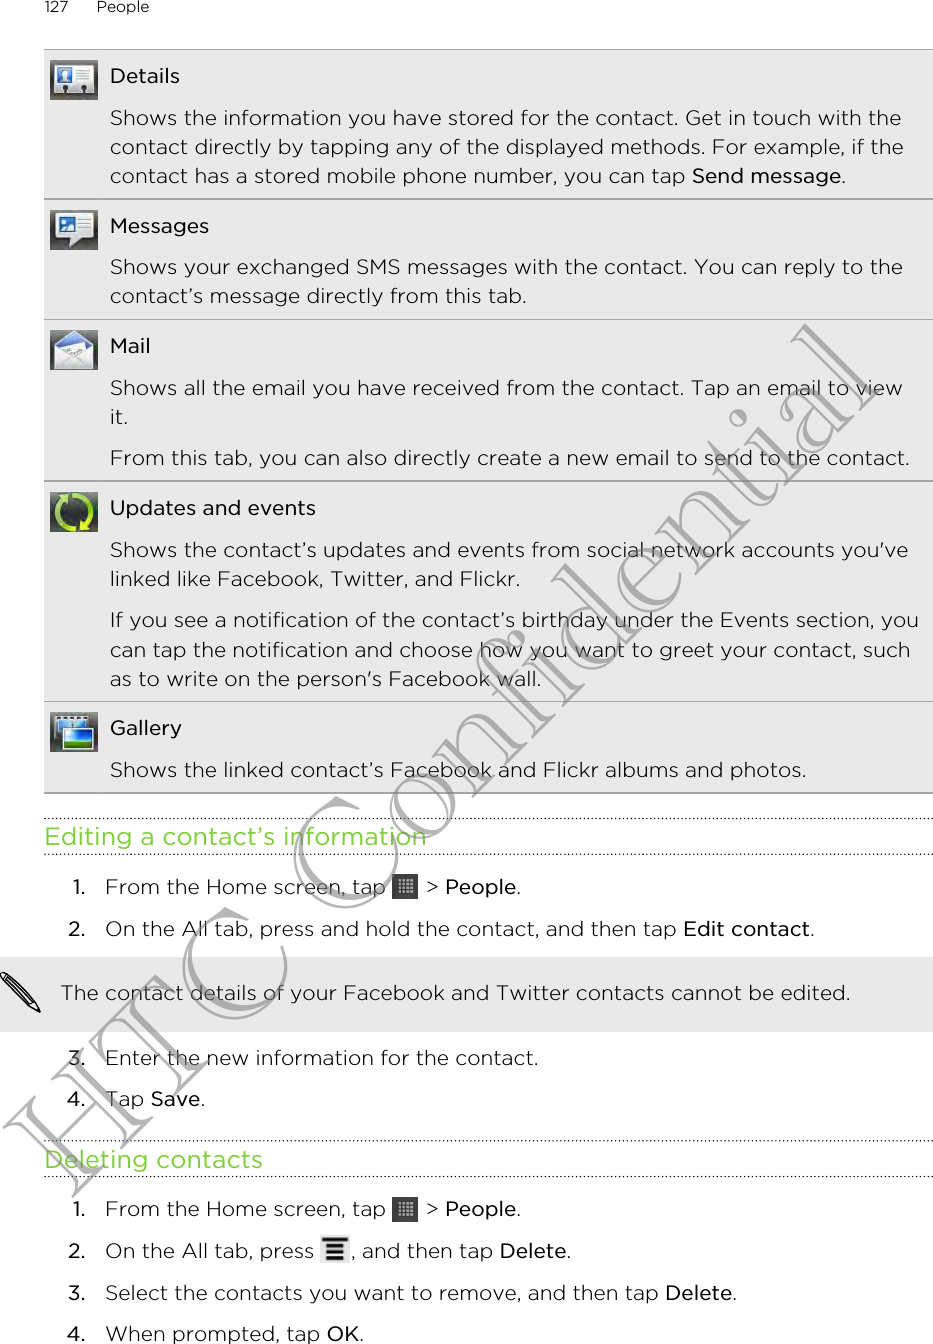 DetailsShows the information you have stored for the contact. Get in touch with thecontact directly by tapping any of the displayed methods. For example, if thecontact has a stored mobile phone number, you can tap Send message.MessagesShows your exchanged SMS messages with the contact. You can reply to thecontact’s message directly from this tab.MailShows all the email you have received from the contact. Tap an email to viewit.From this tab, you can also directly create a new email to send to the contact.Updates and eventsShows the contact’s updates and events from social network accounts you&apos;velinked like Facebook, Twitter, and Flickr.If you see a notification of the contact’s birthday under the Events section, youcan tap the notification and choose how you want to greet your contact, suchas to write on the person&apos;s Facebook wall.GalleryShows the linked contact’s Facebook and Flickr albums and photos.Editing a contact’s information1. From the Home screen, tap   &gt; People.2. On the All tab, press and hold the contact, and then tap Edit contact. The contact details of your Facebook and Twitter contacts cannot be edited.3. Enter the new information for the contact.4. Tap Save.Deleting contacts1. From the Home screen, tap   &gt; People.2. On the All tab, press  , and then tap Delete.3. Select the contacts you want to remove, and then tap Delete.4. When prompted, tap OK.127 PeopleHTC Confidential